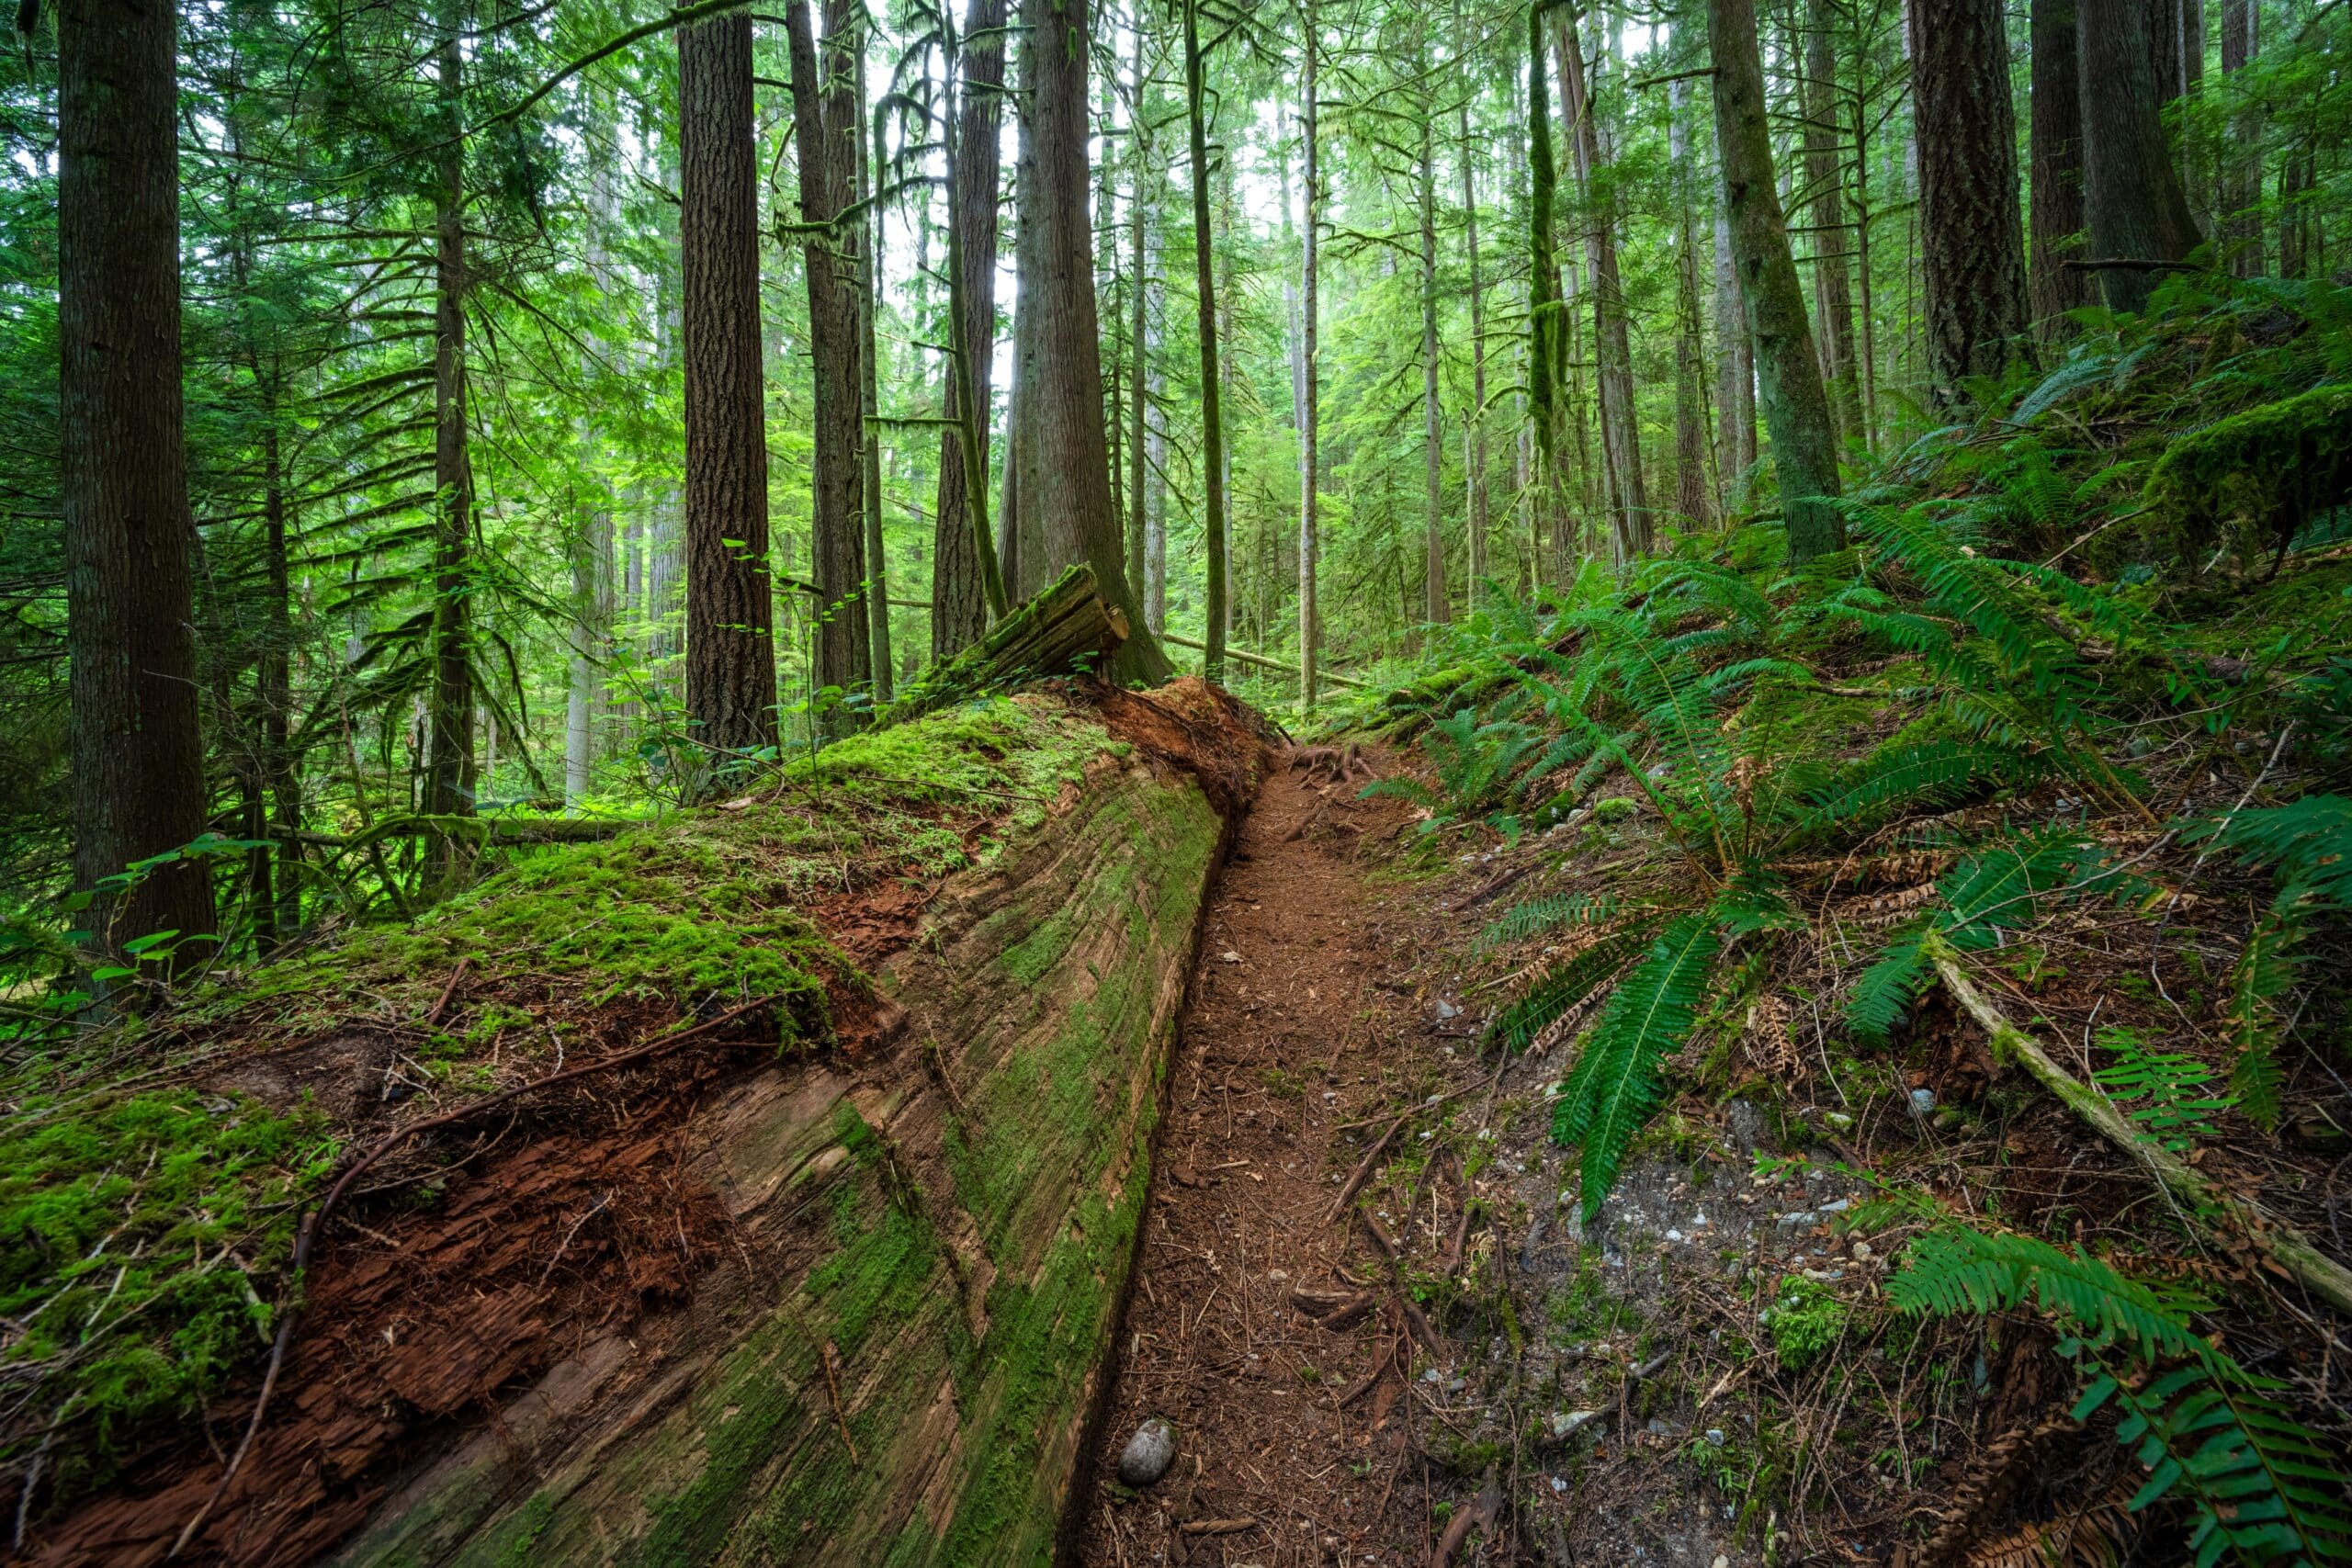 A fallen tree on a trail in a forest.